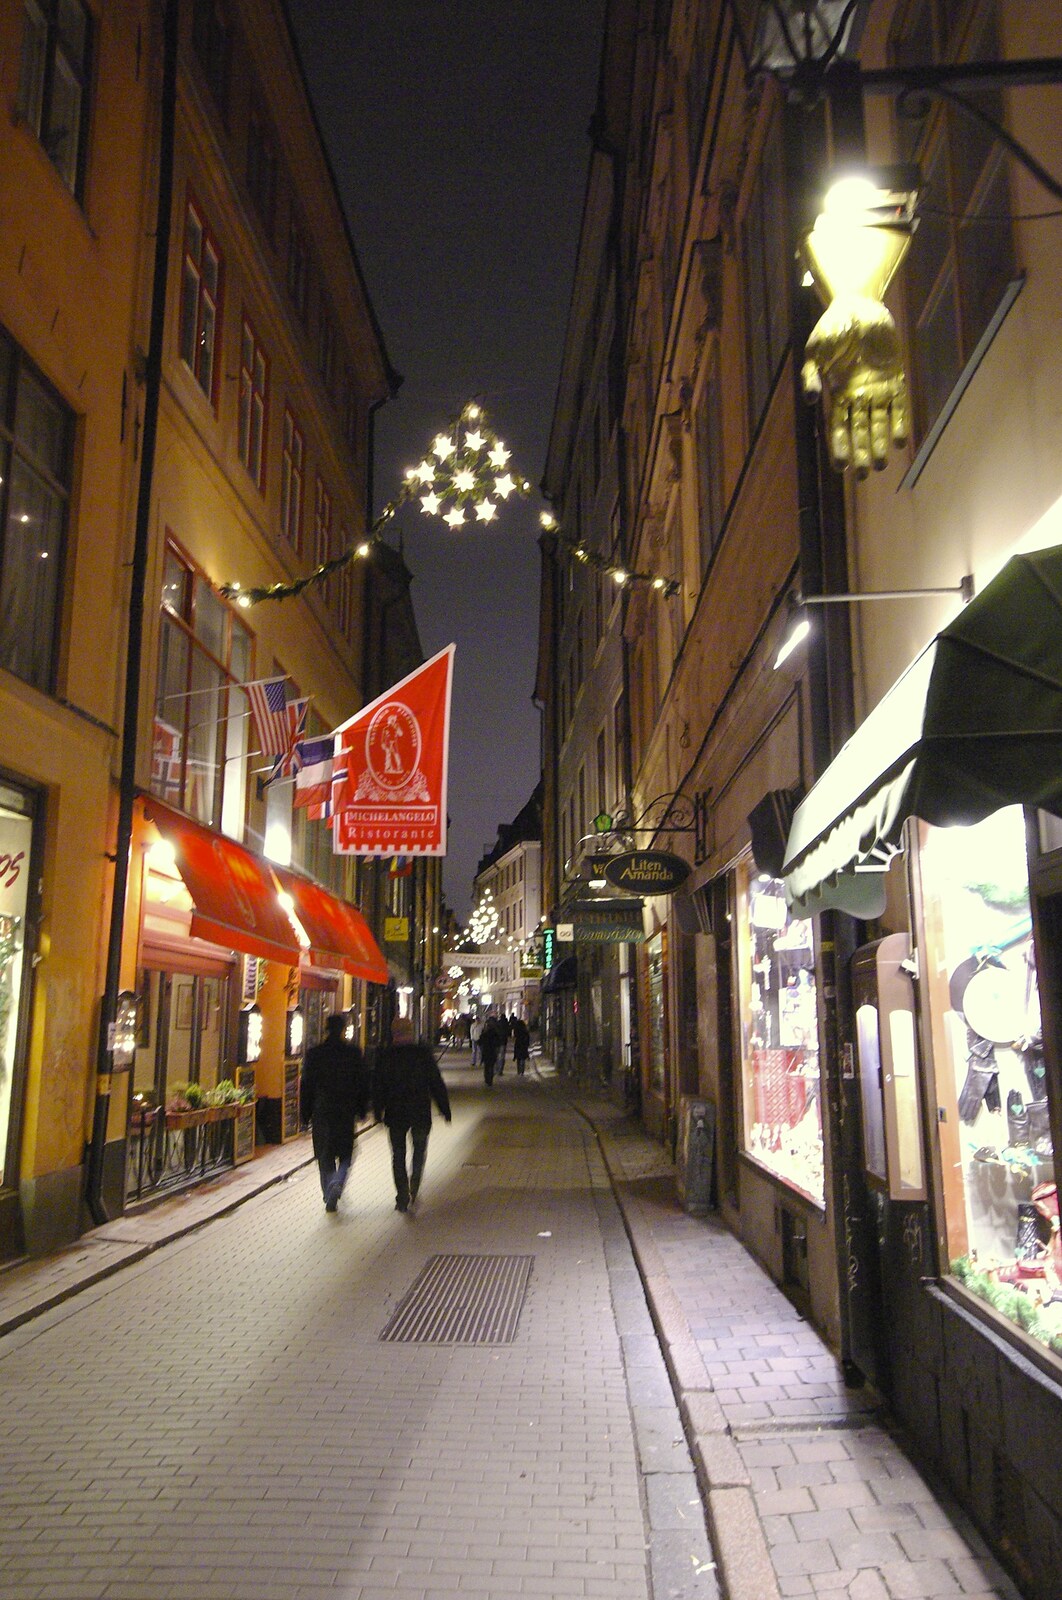 Festive street, and the dangling hand from Gamla Stan, Stockholm, Sweden - 15th December 2007